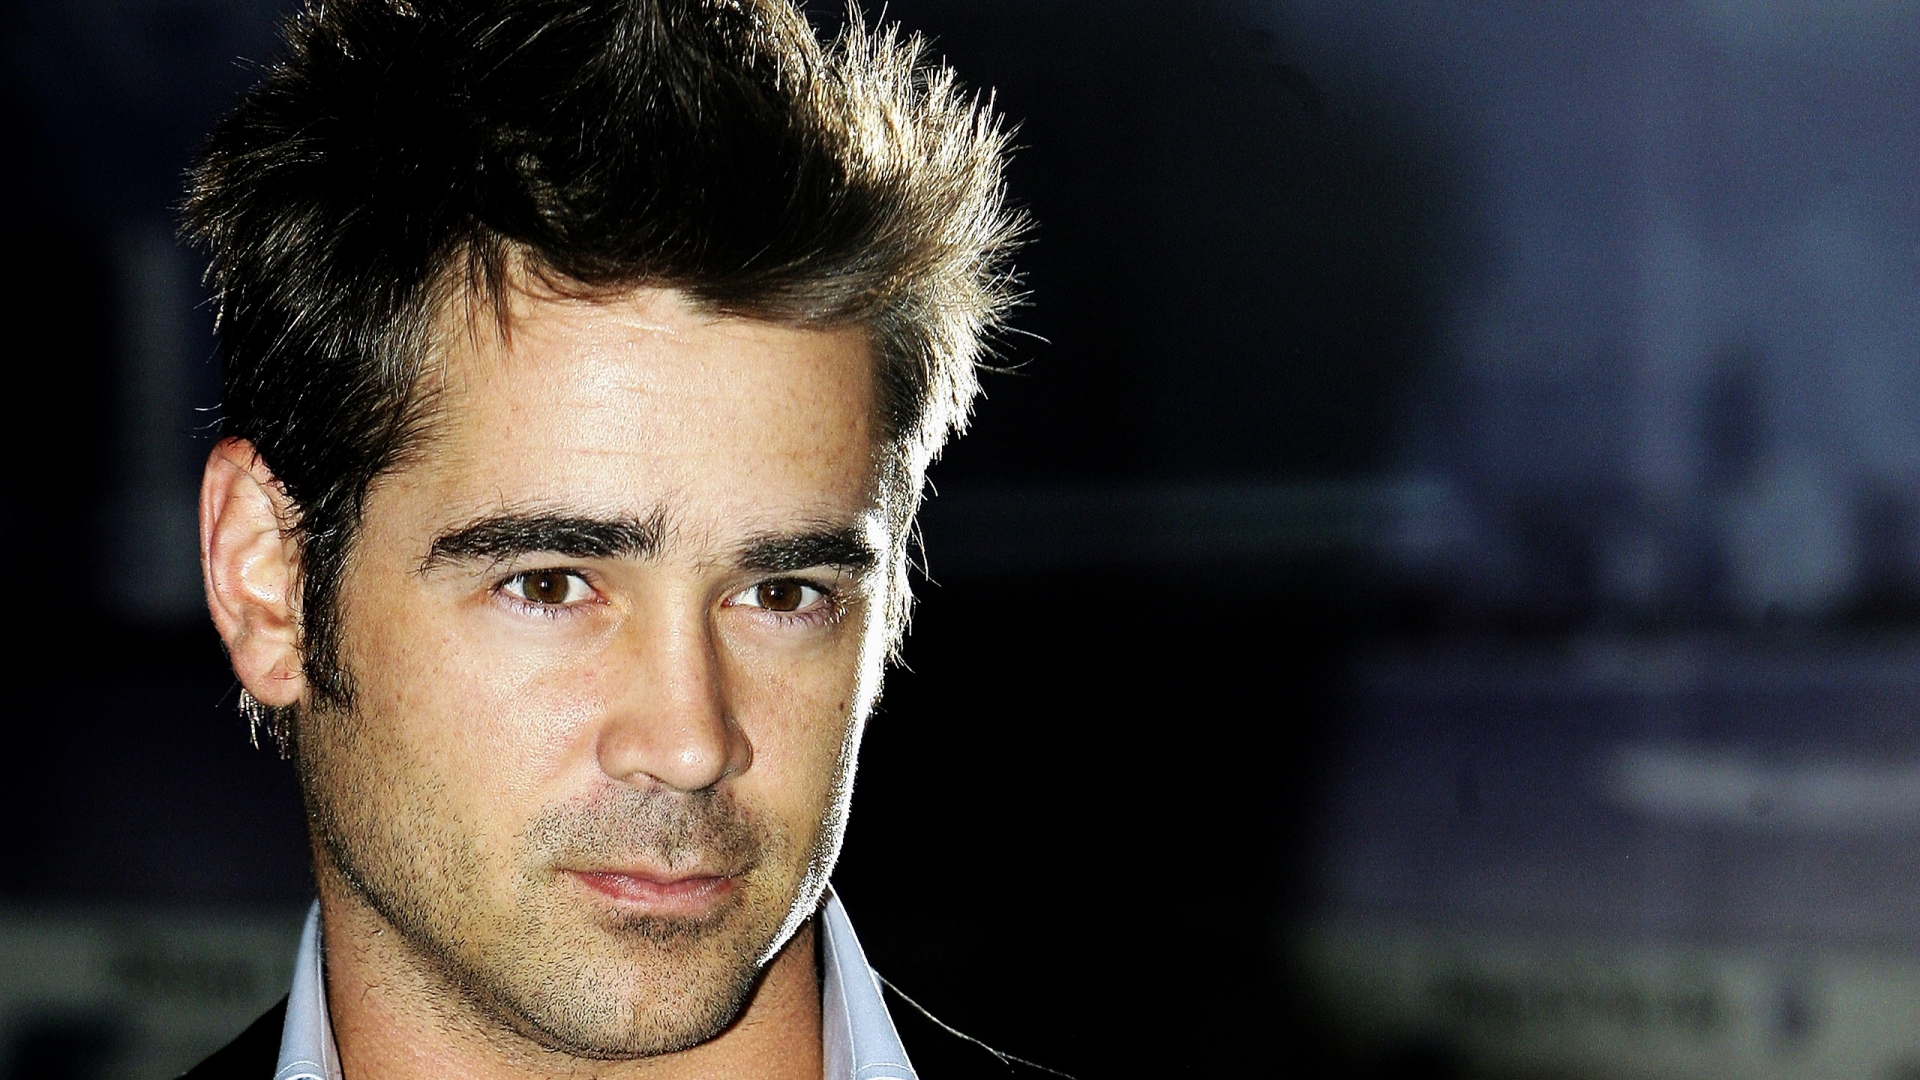 Colin James Farrell for 1920 x 1080 HDTV 1080p resolution